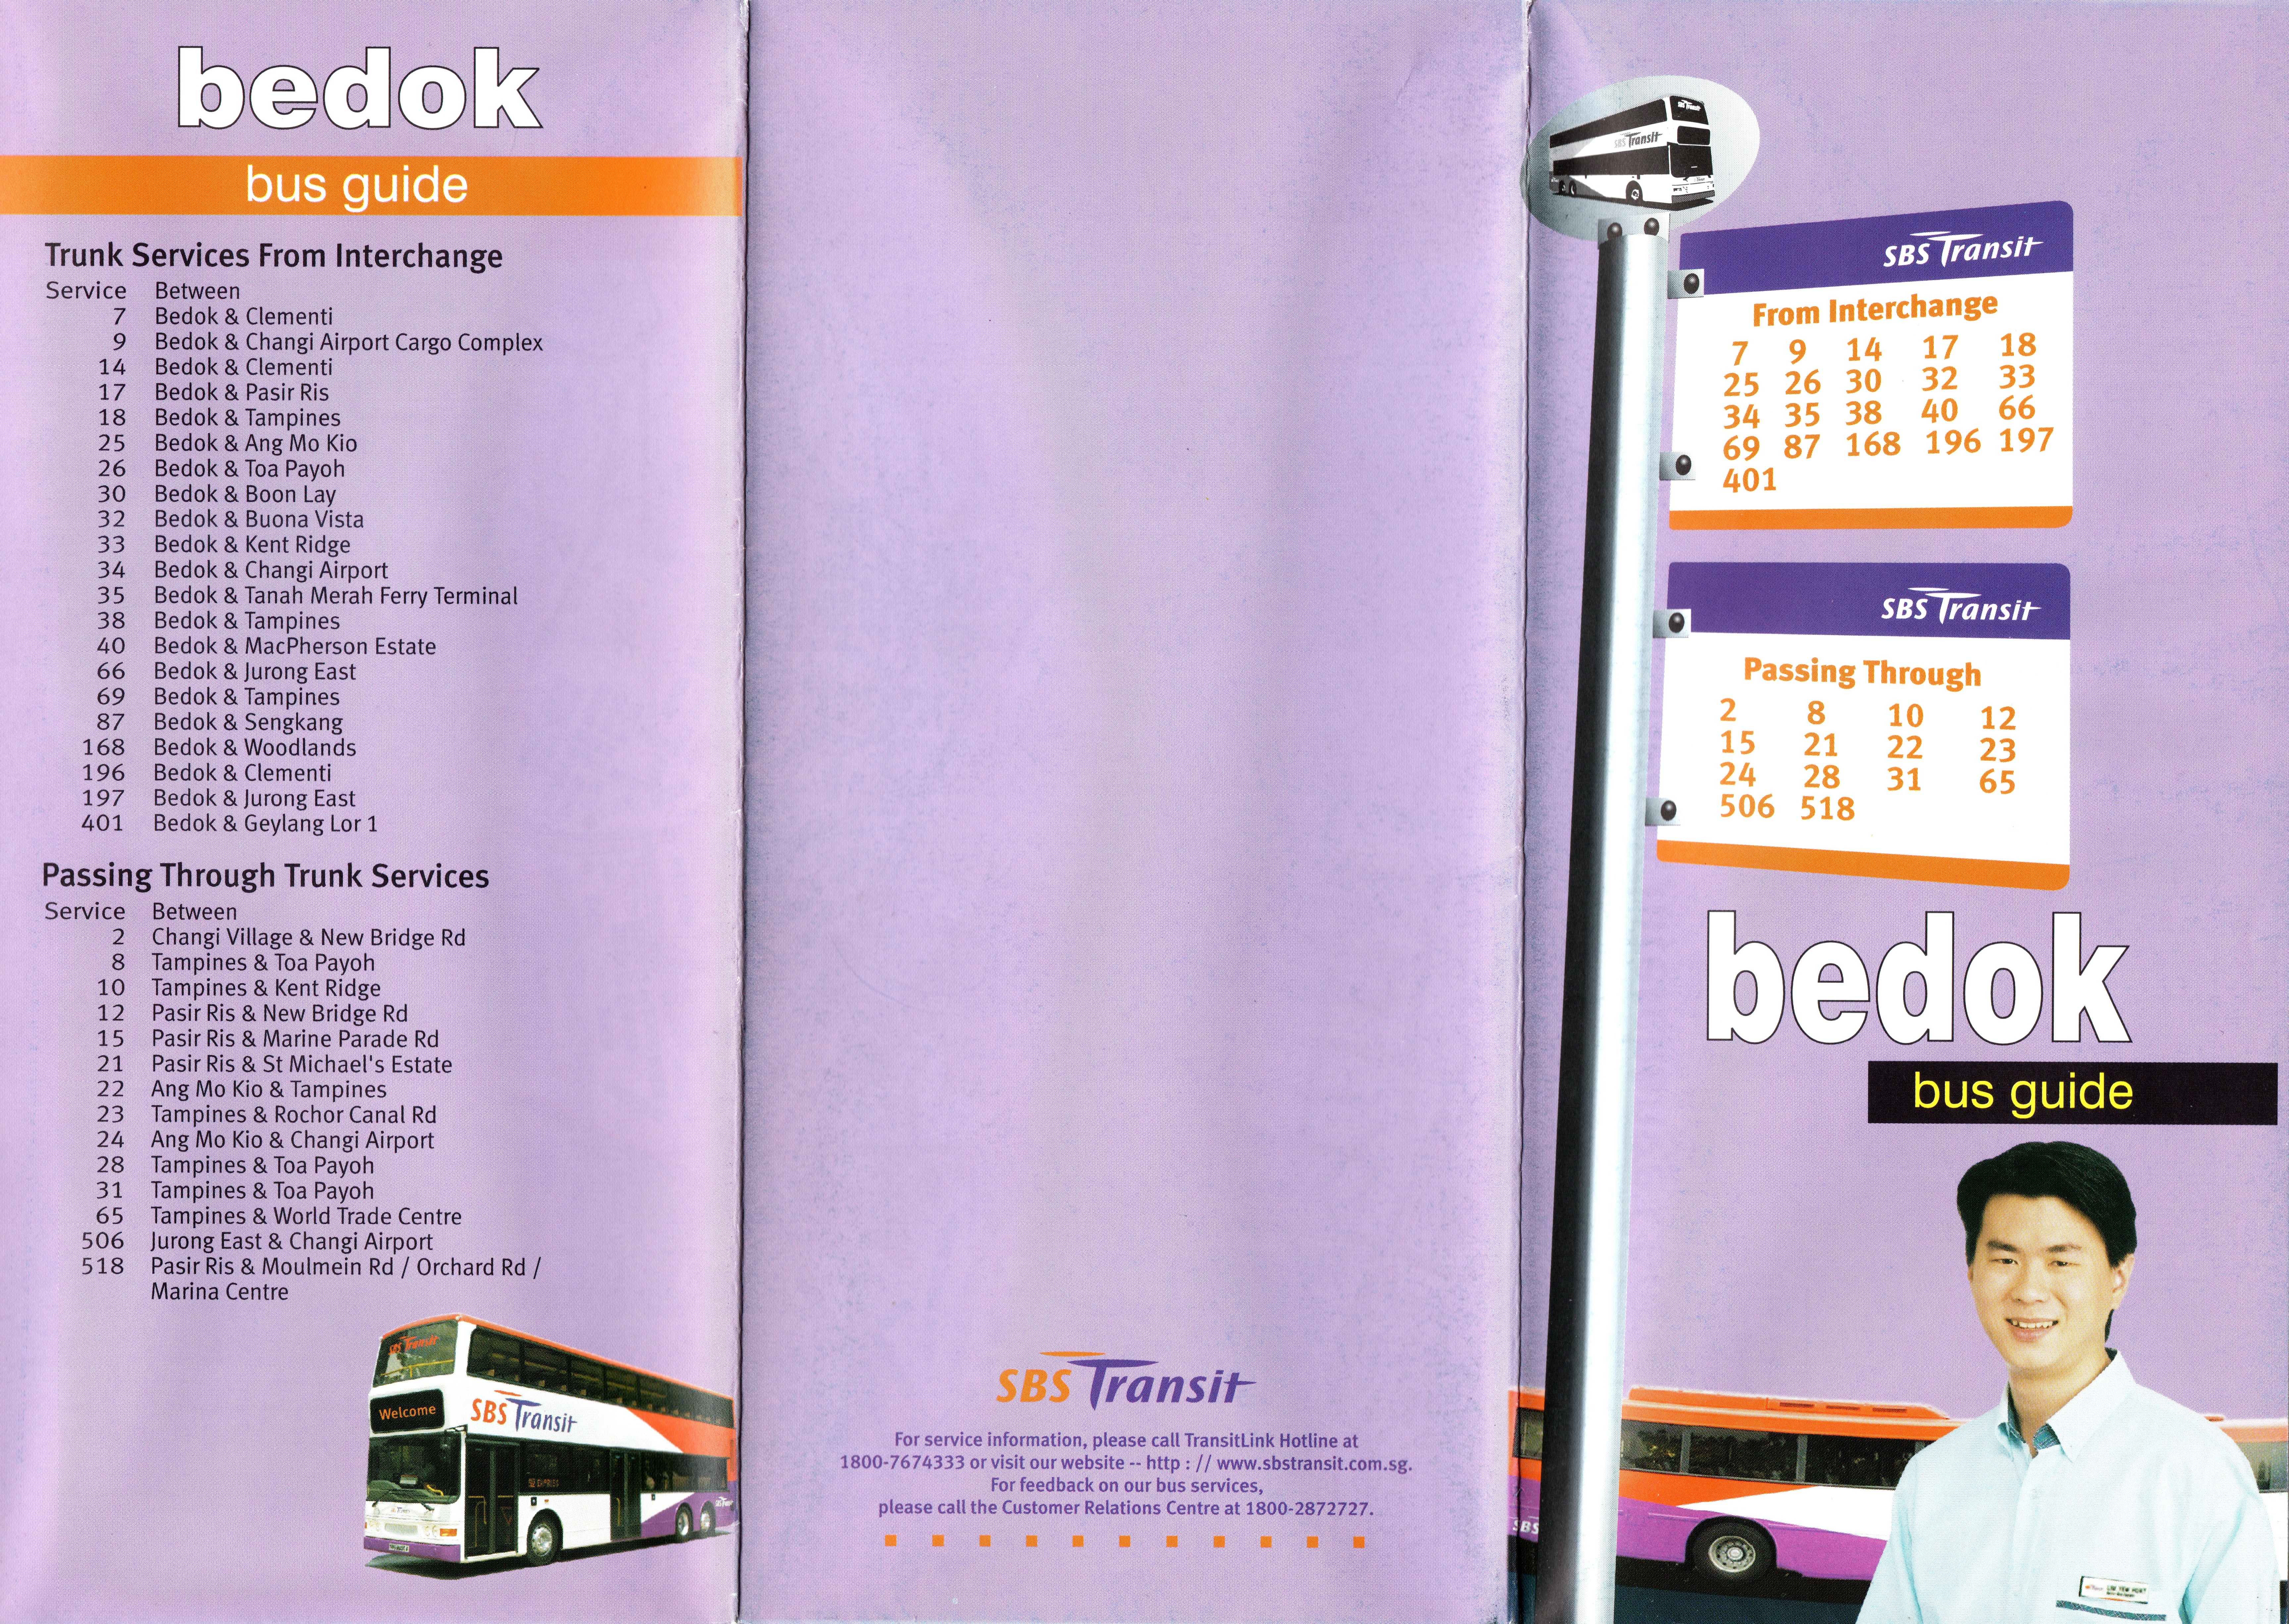 300pxBedok Town Guide - 7 Apr 2002 (Front) (2)